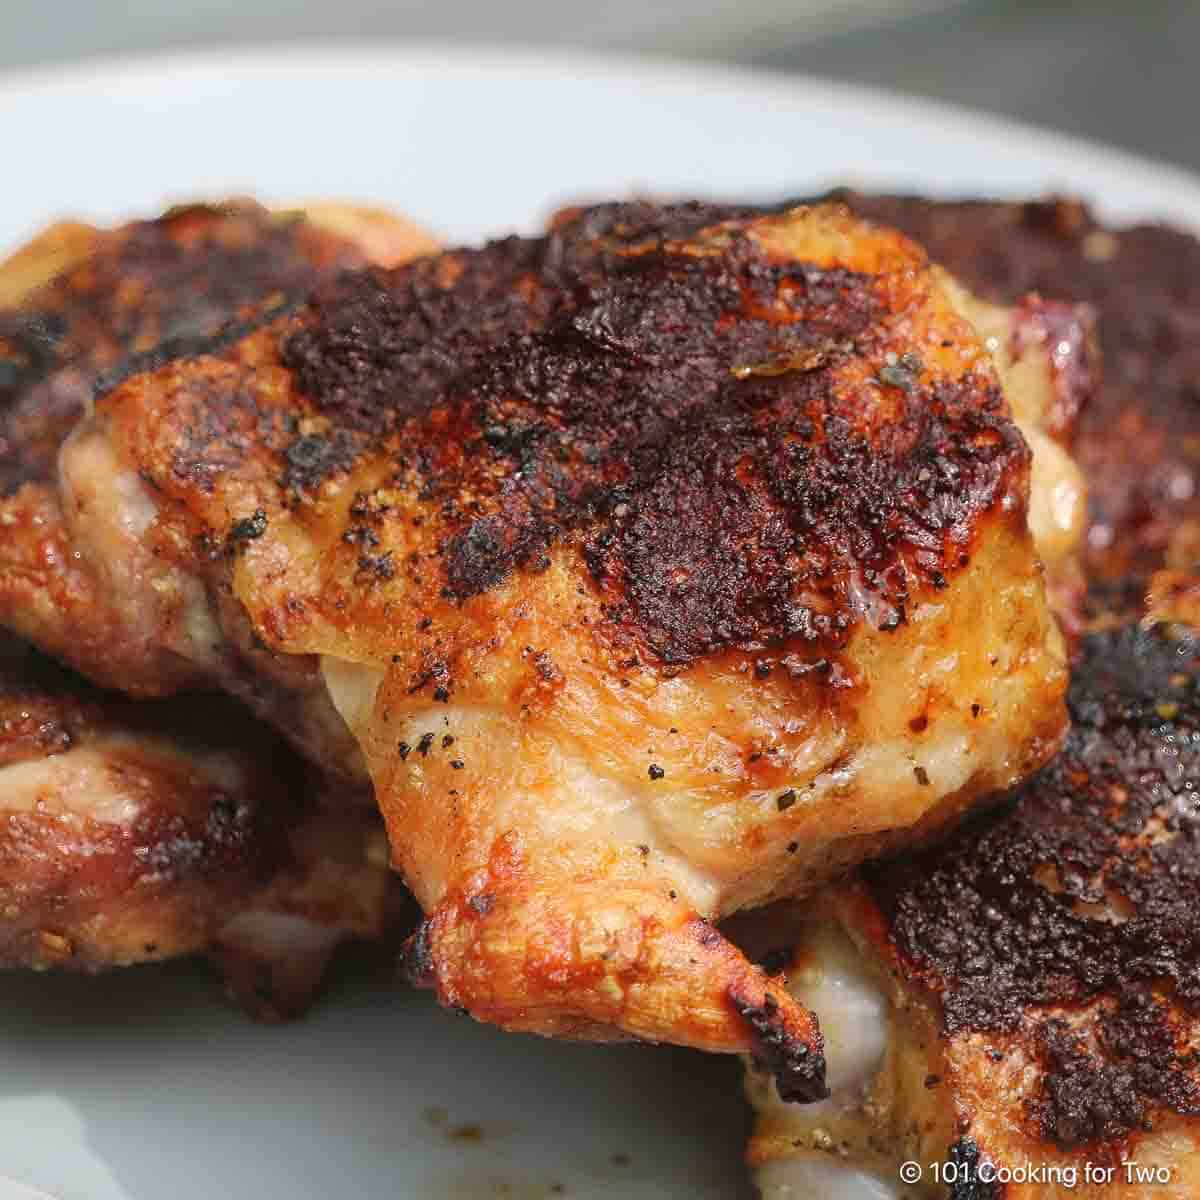 Grilled chicken with some crispy char on skin.